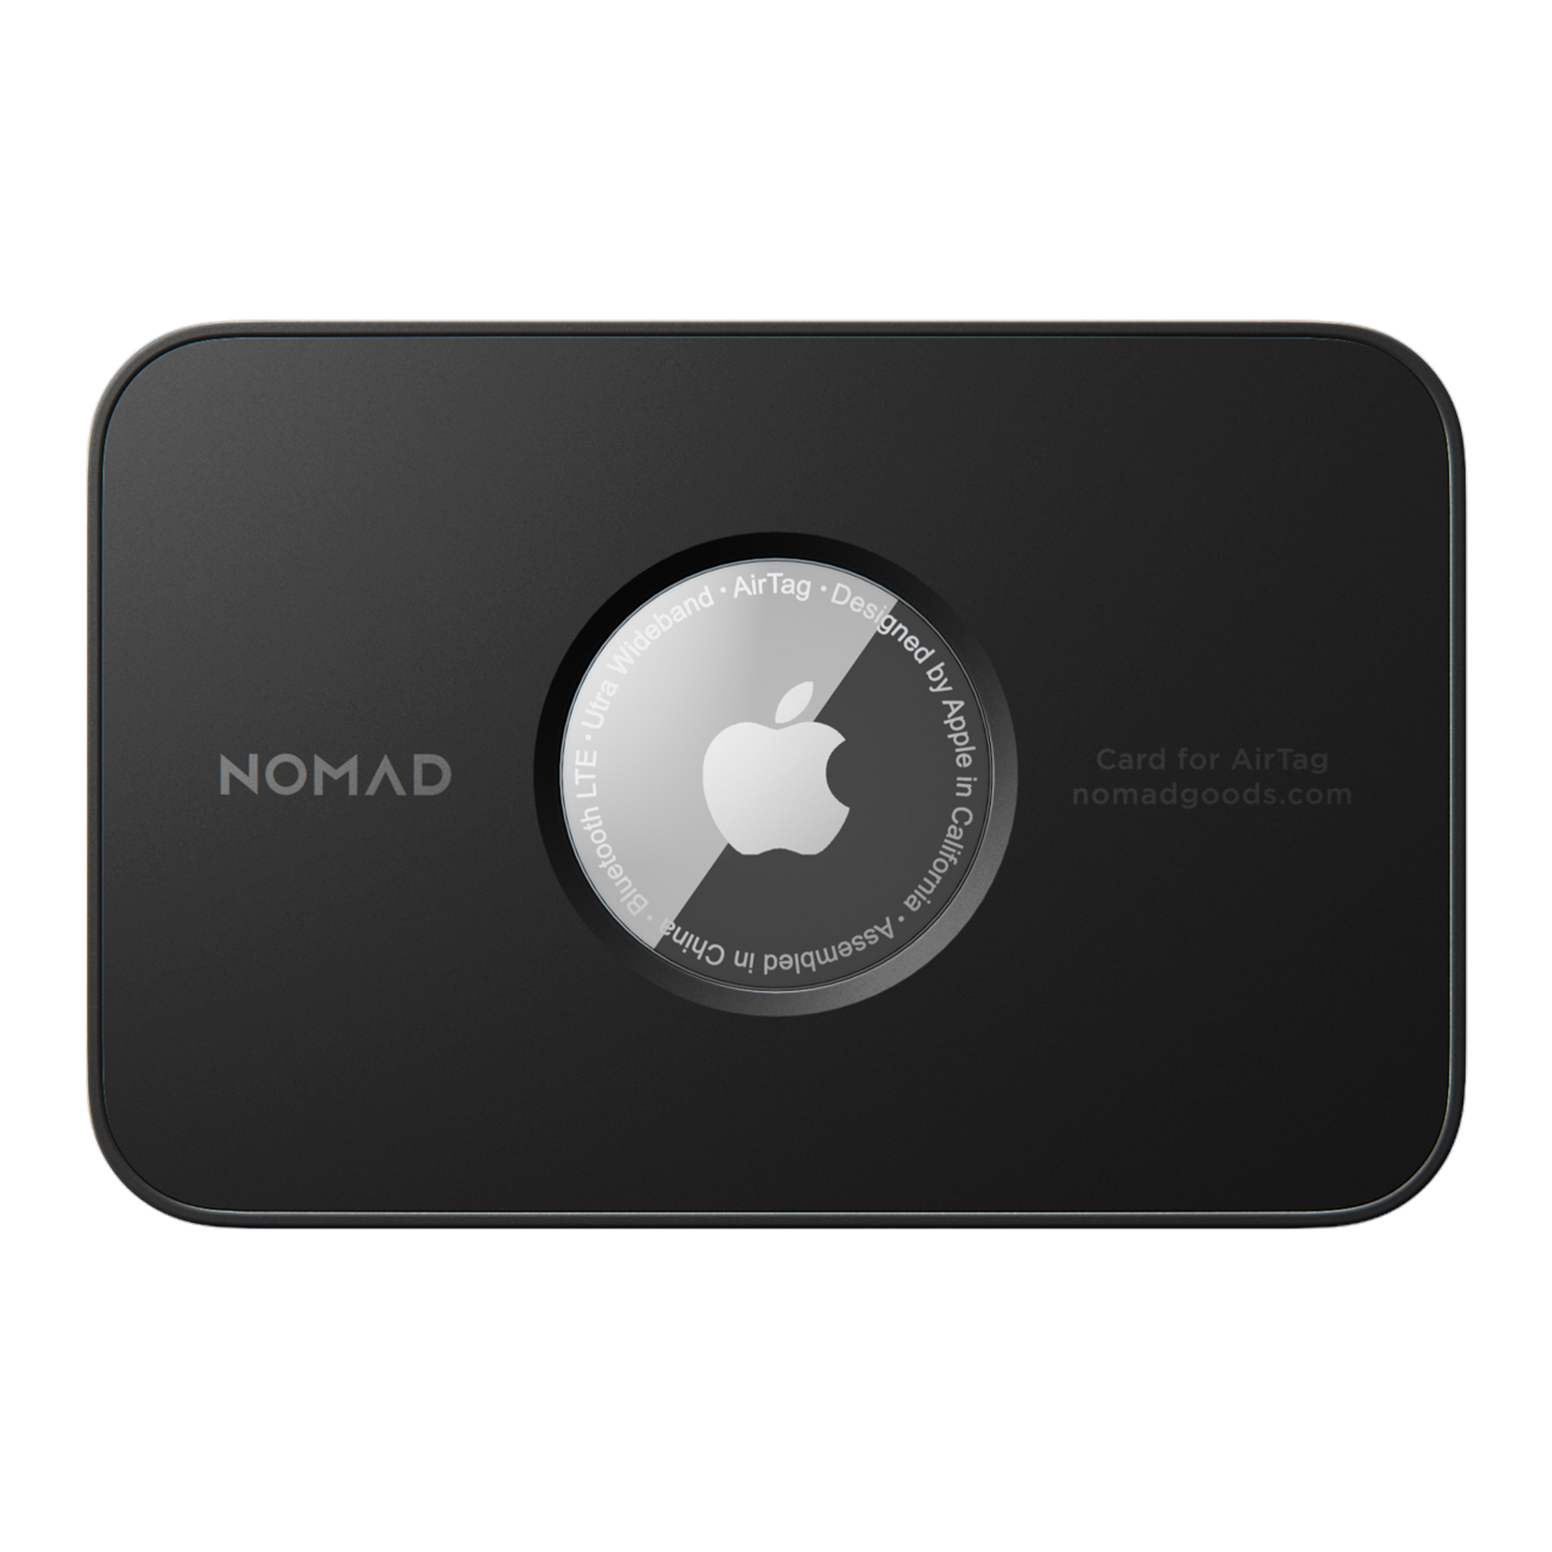 Nomad Wallet Tracking Card for AirTag